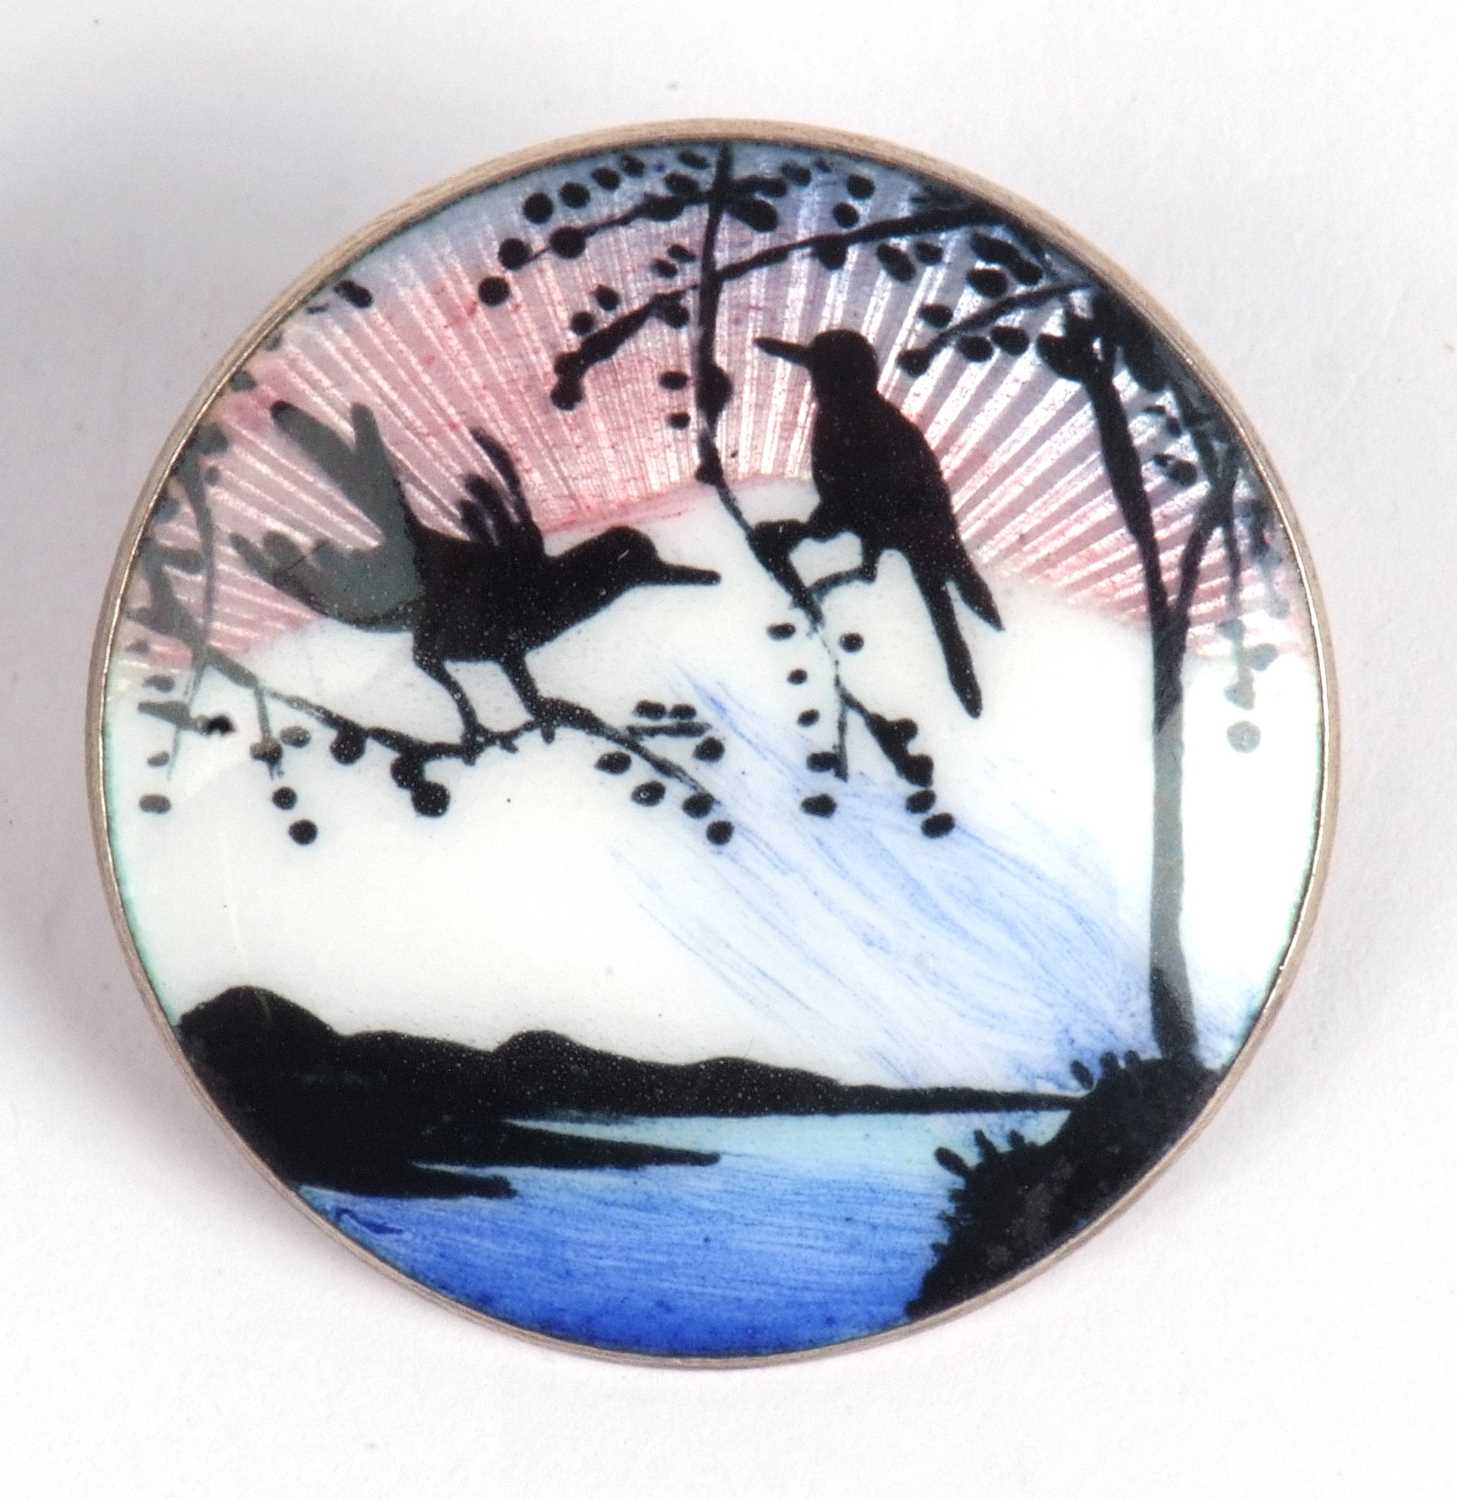 Vintage sterling enamel brooch, the circular panel with a sun setting over water, rocks and birds, - Image 2 of 4